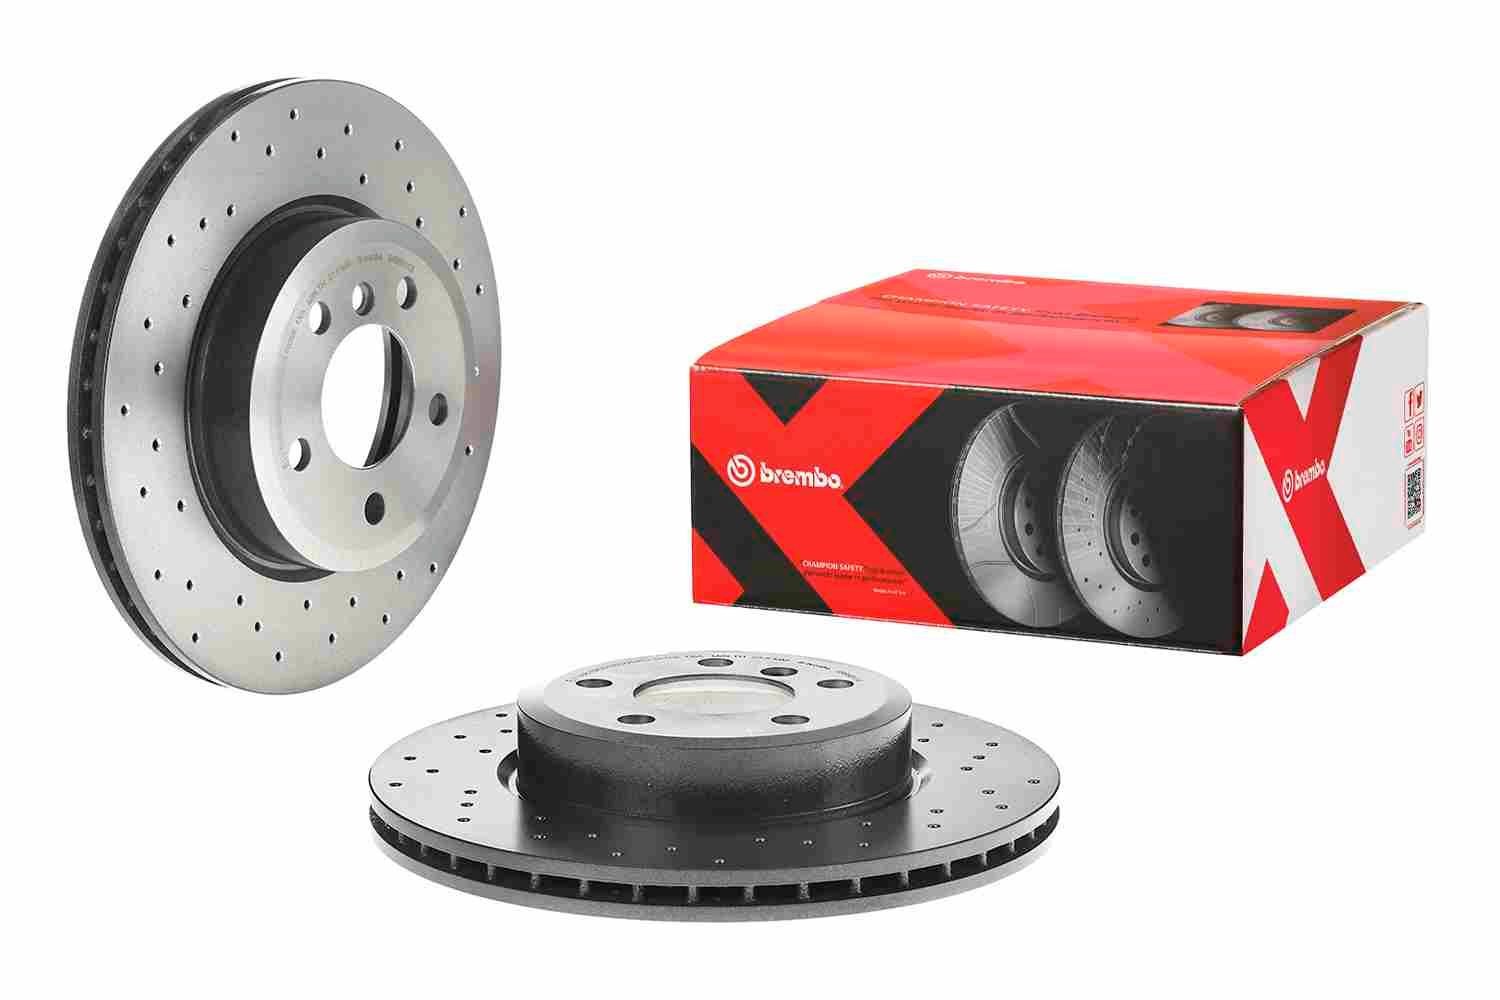 09.9581.1X Brake discs 09.9581.1X BREMBO 325x25mm, 5, perforated/vented, Coated, High-carbon